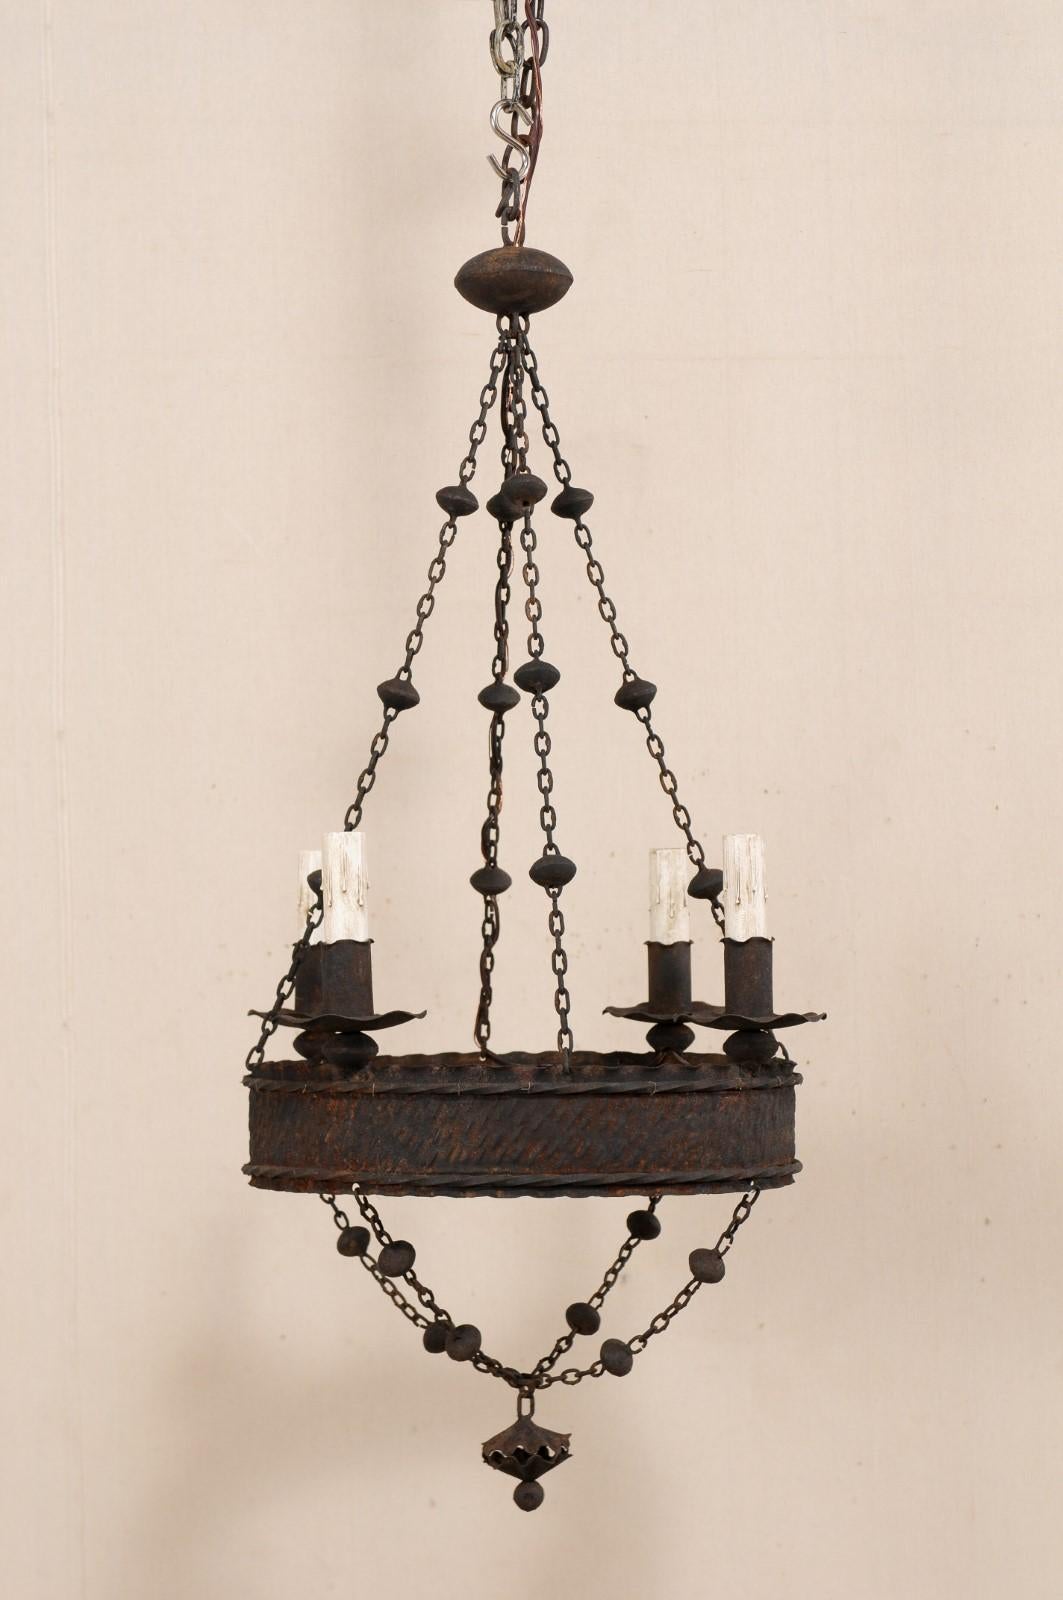 Patinated French Iron Basket-Style Four-Light Chandelier from the Mid-20th Century